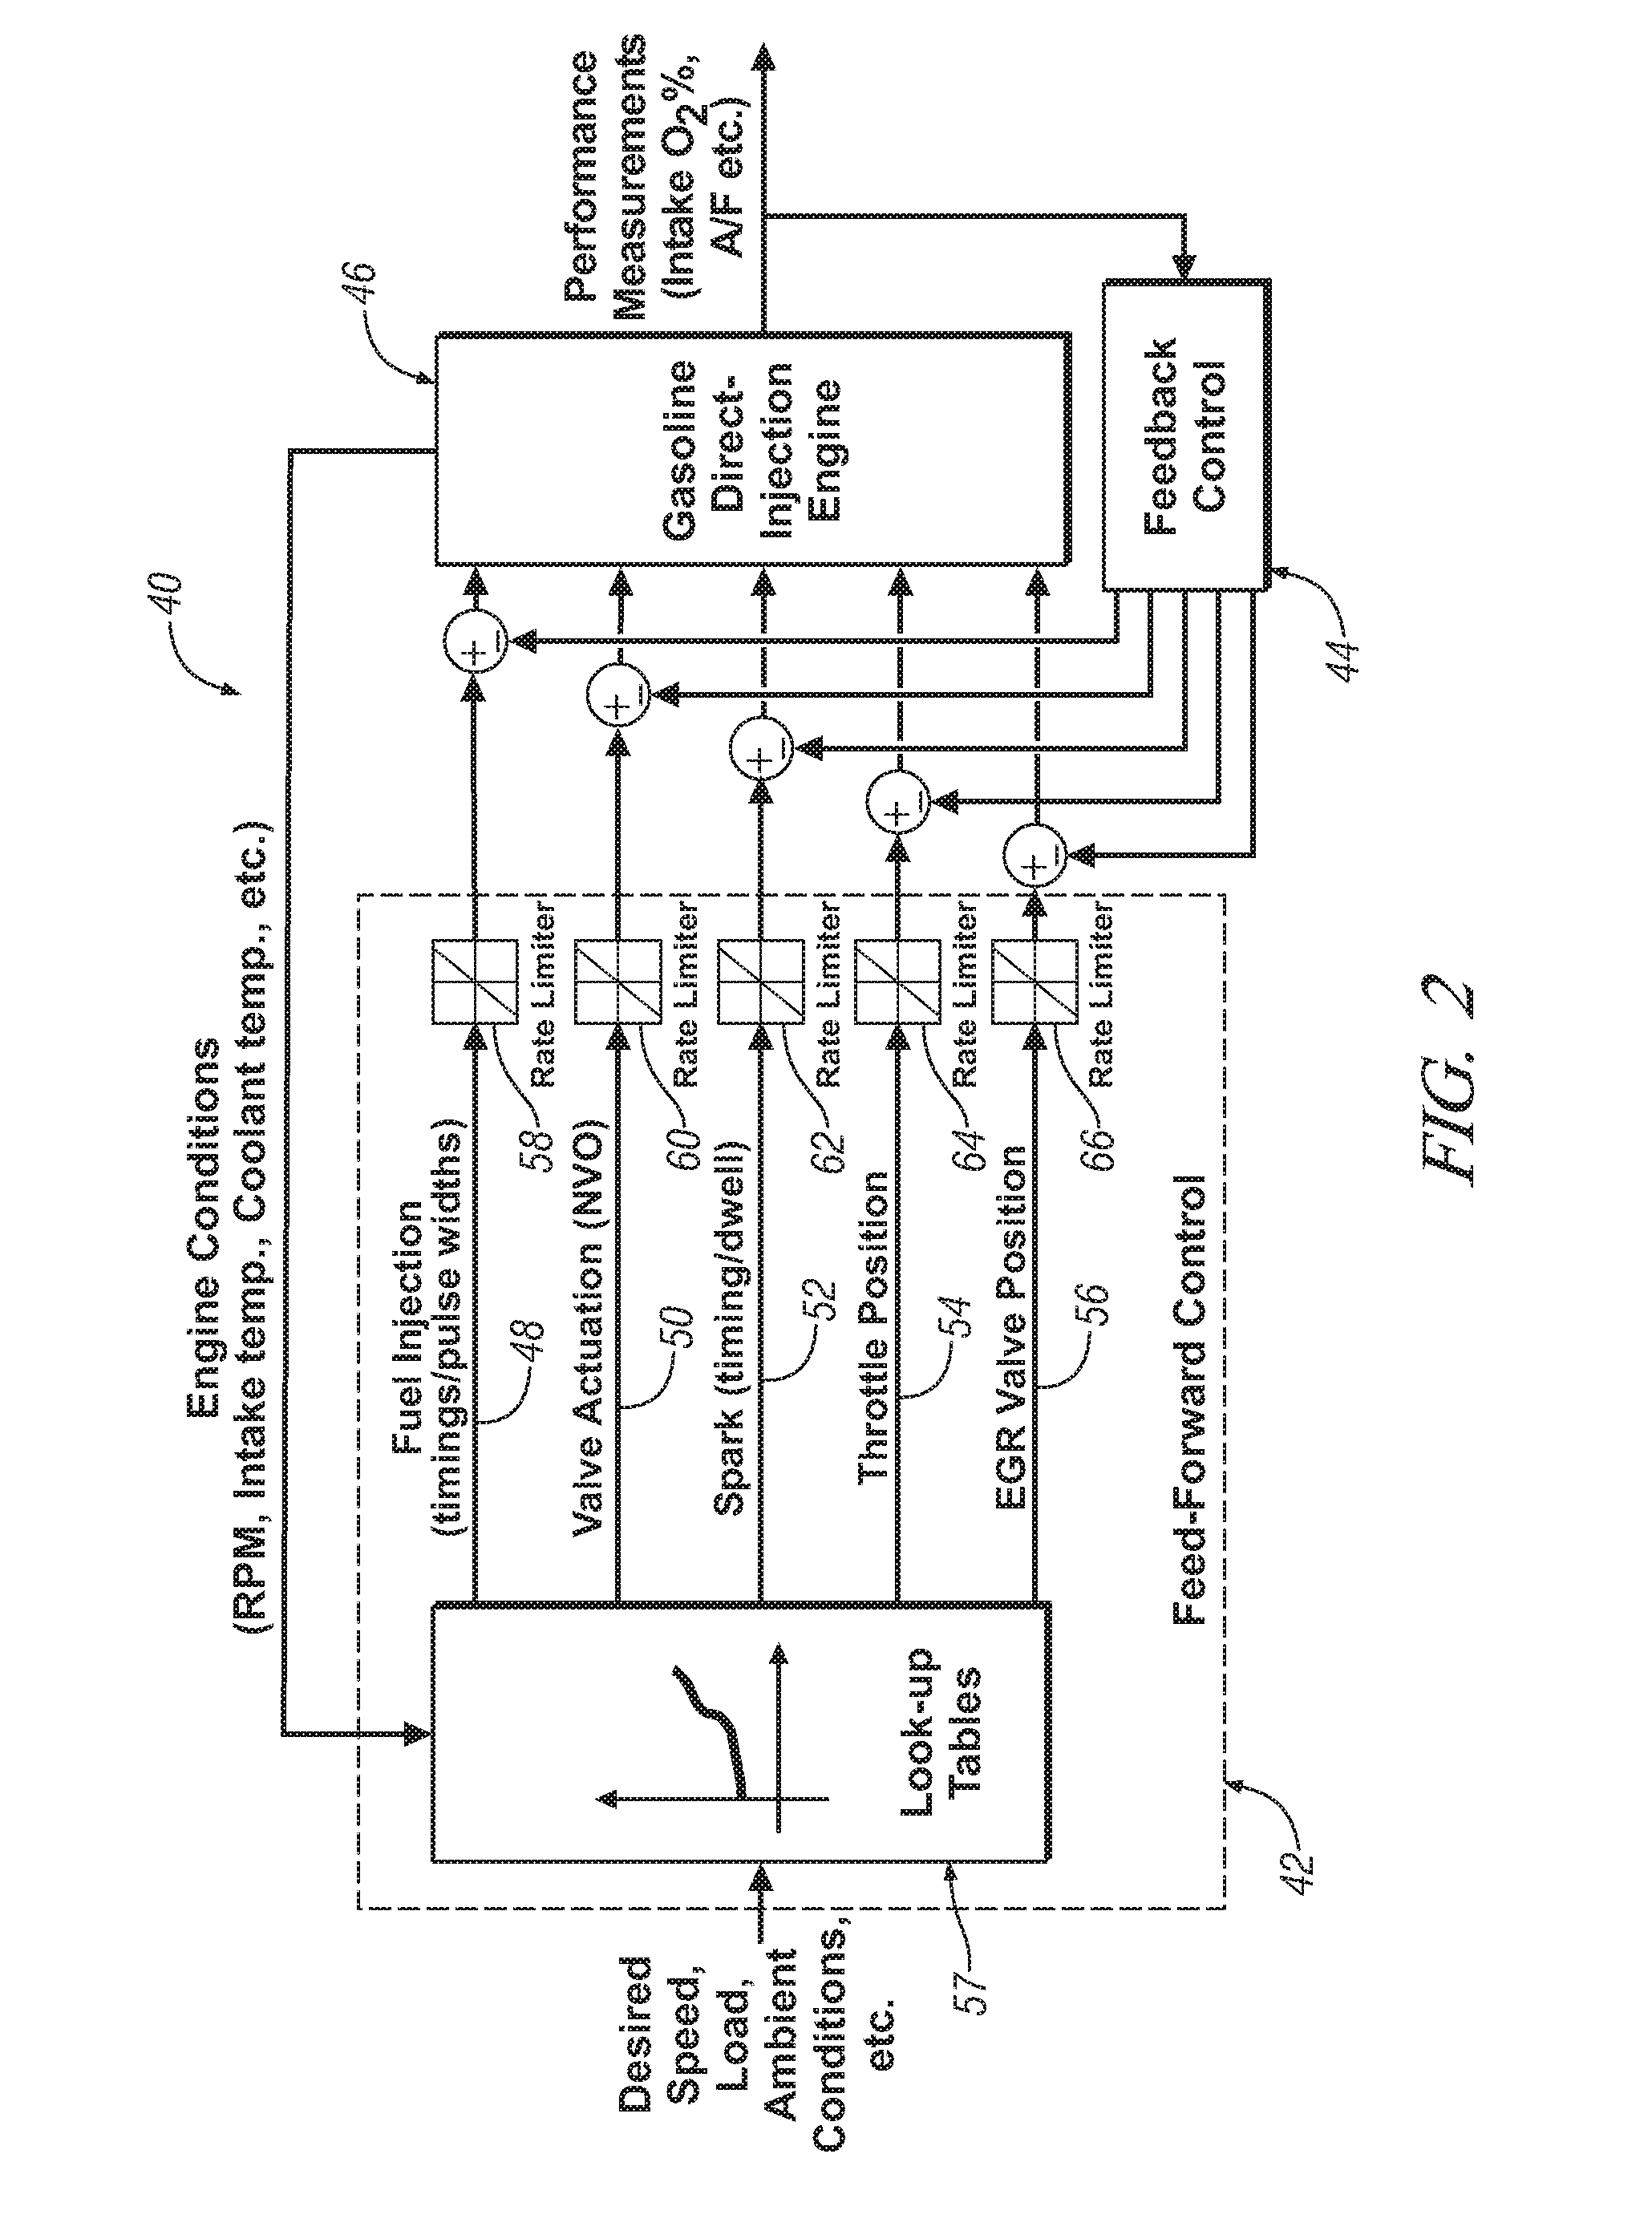 Homogeneous charge compression ignition engine operation